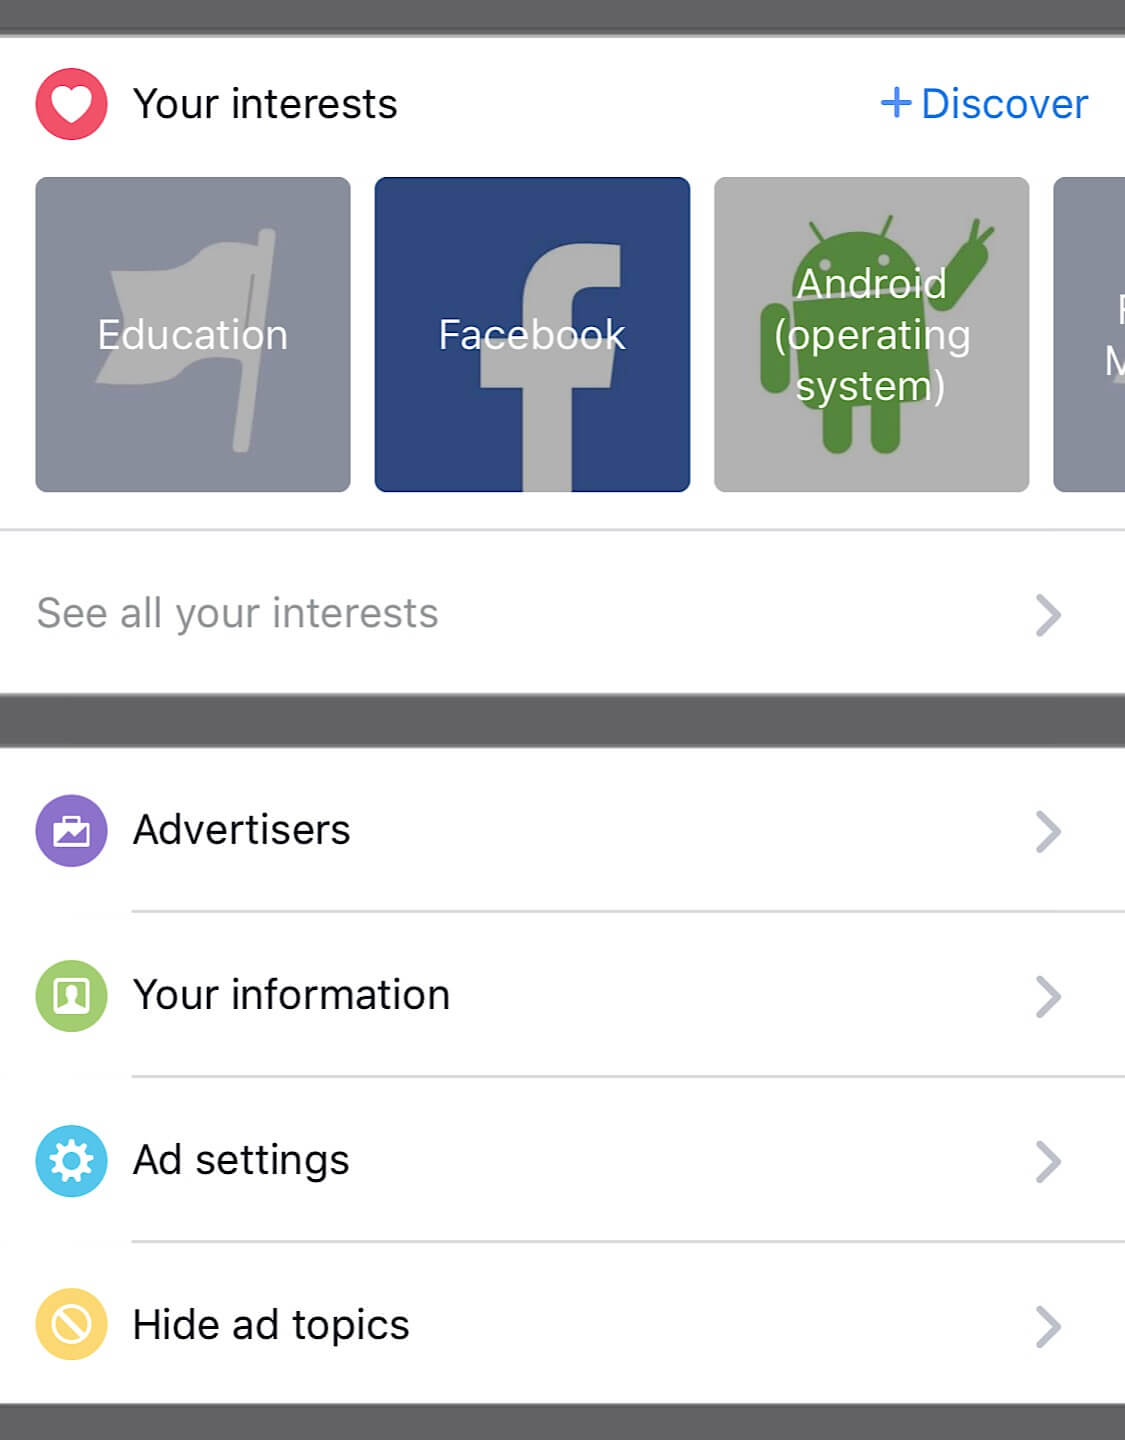 Screenshots showing the specific ad preference settings you should change to improve your privacy on Facebook.